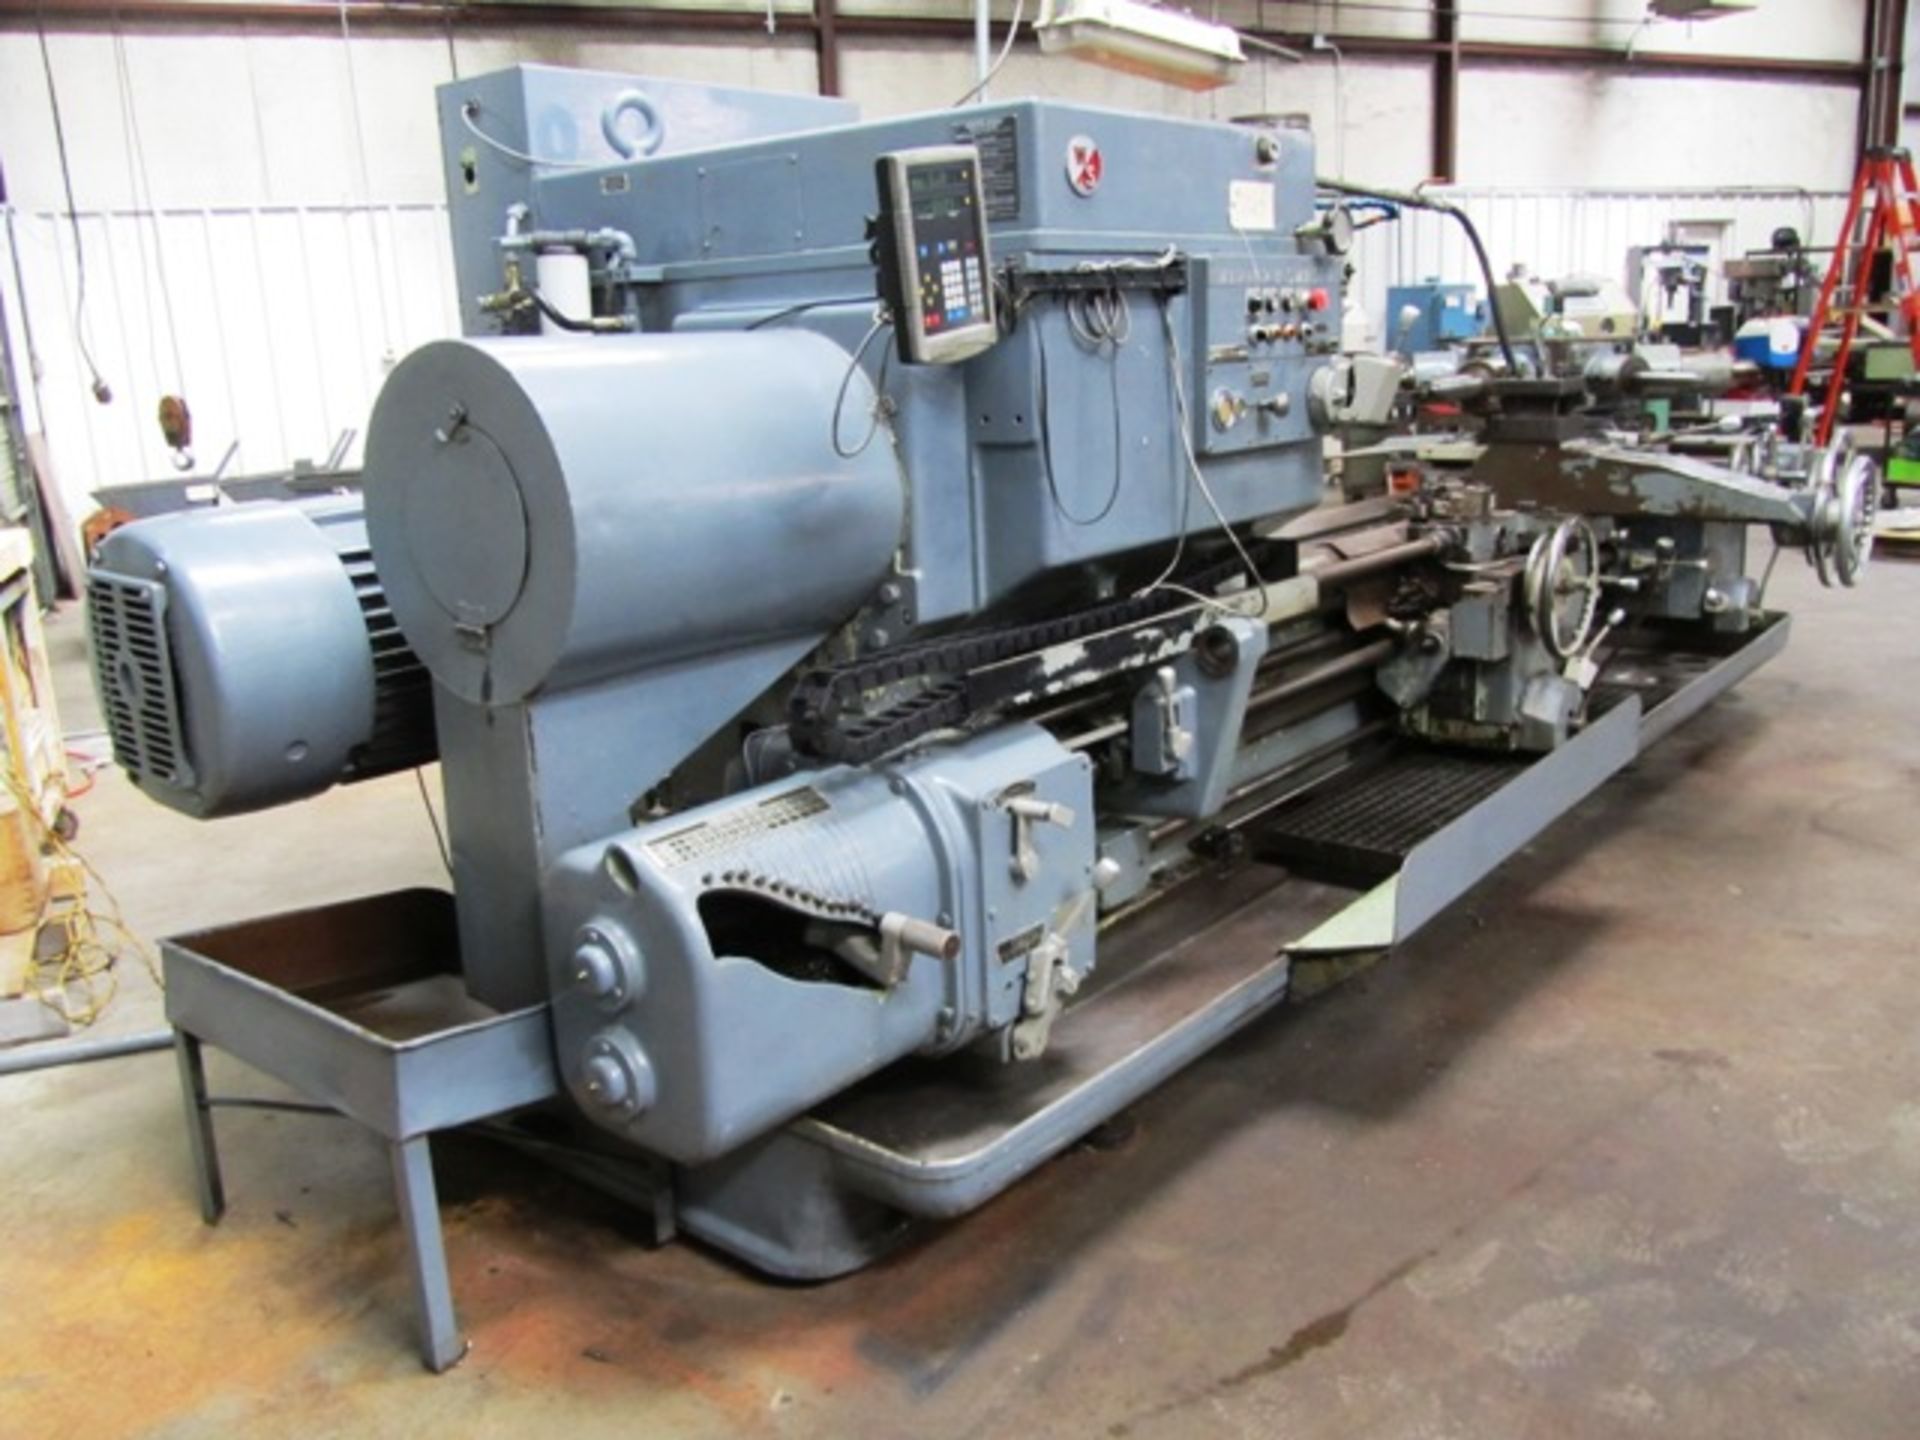 Warner & Swasey #4A Model M-3350 Square Head Turret Lathe with 20'' 4-Jaw Chuck, Power Wrench, 9-1/ - Image 3 of 6